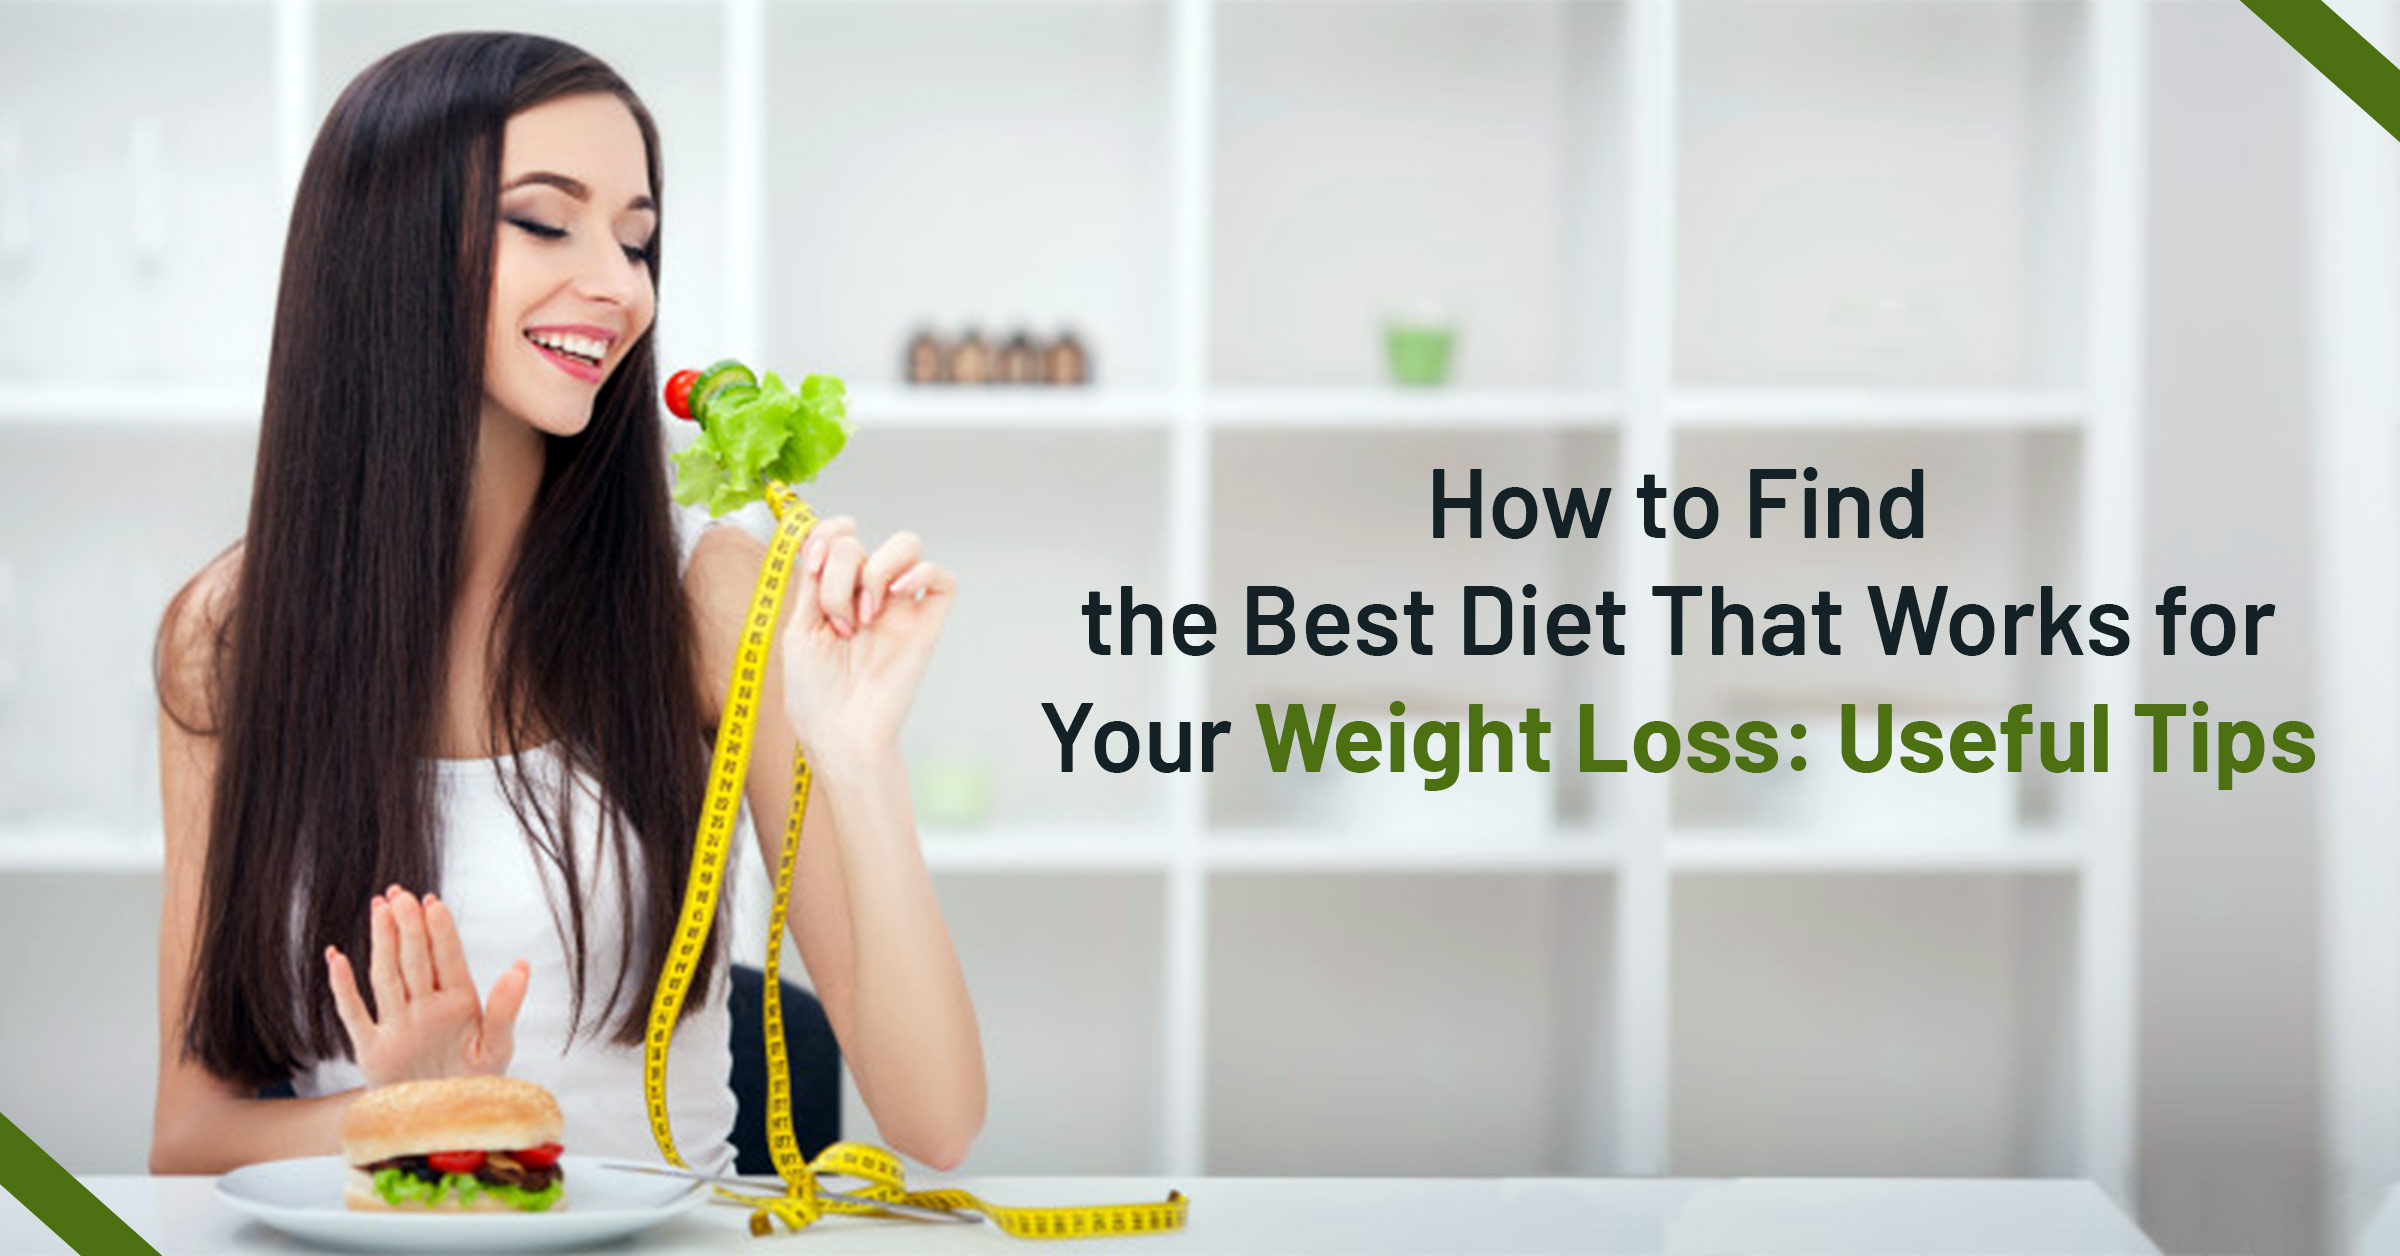 How to Find the Best Diet That Works for Your Weight Loss: Useful Tips